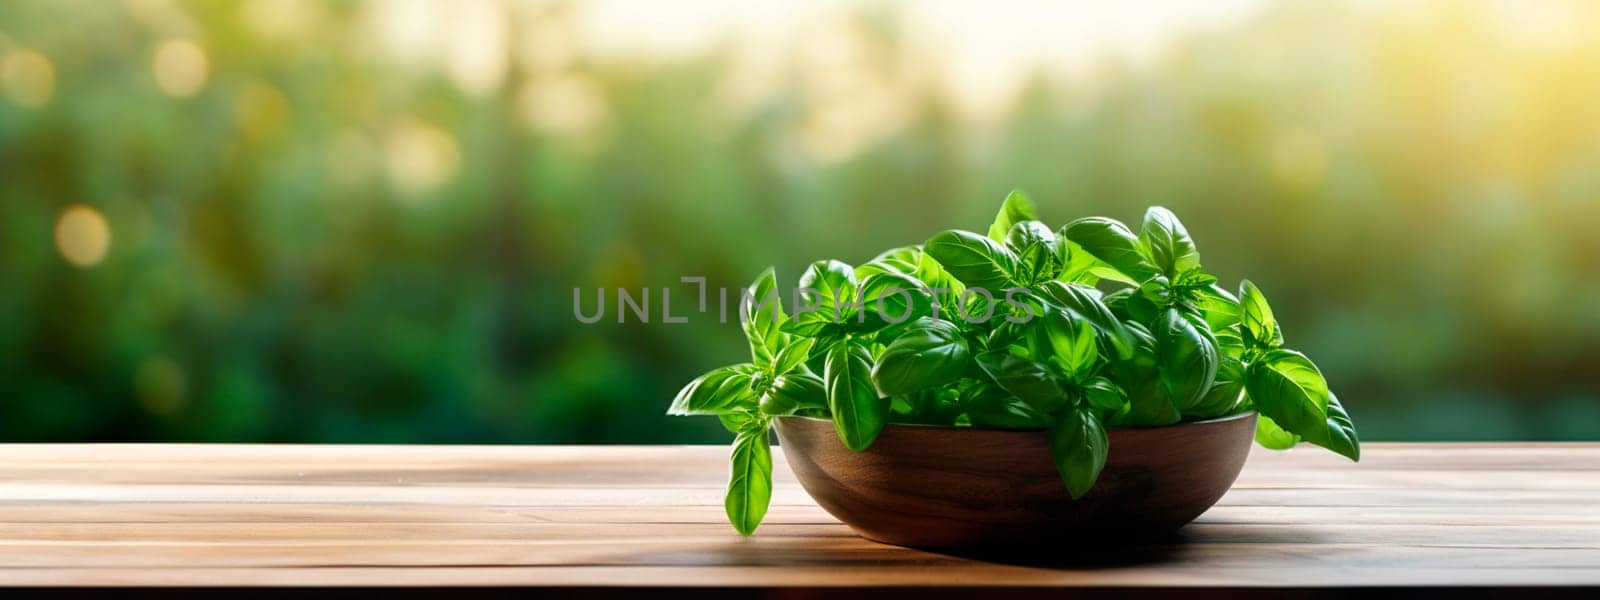 Basil harvest in a bowl on a garden background. Selective focus. Food.